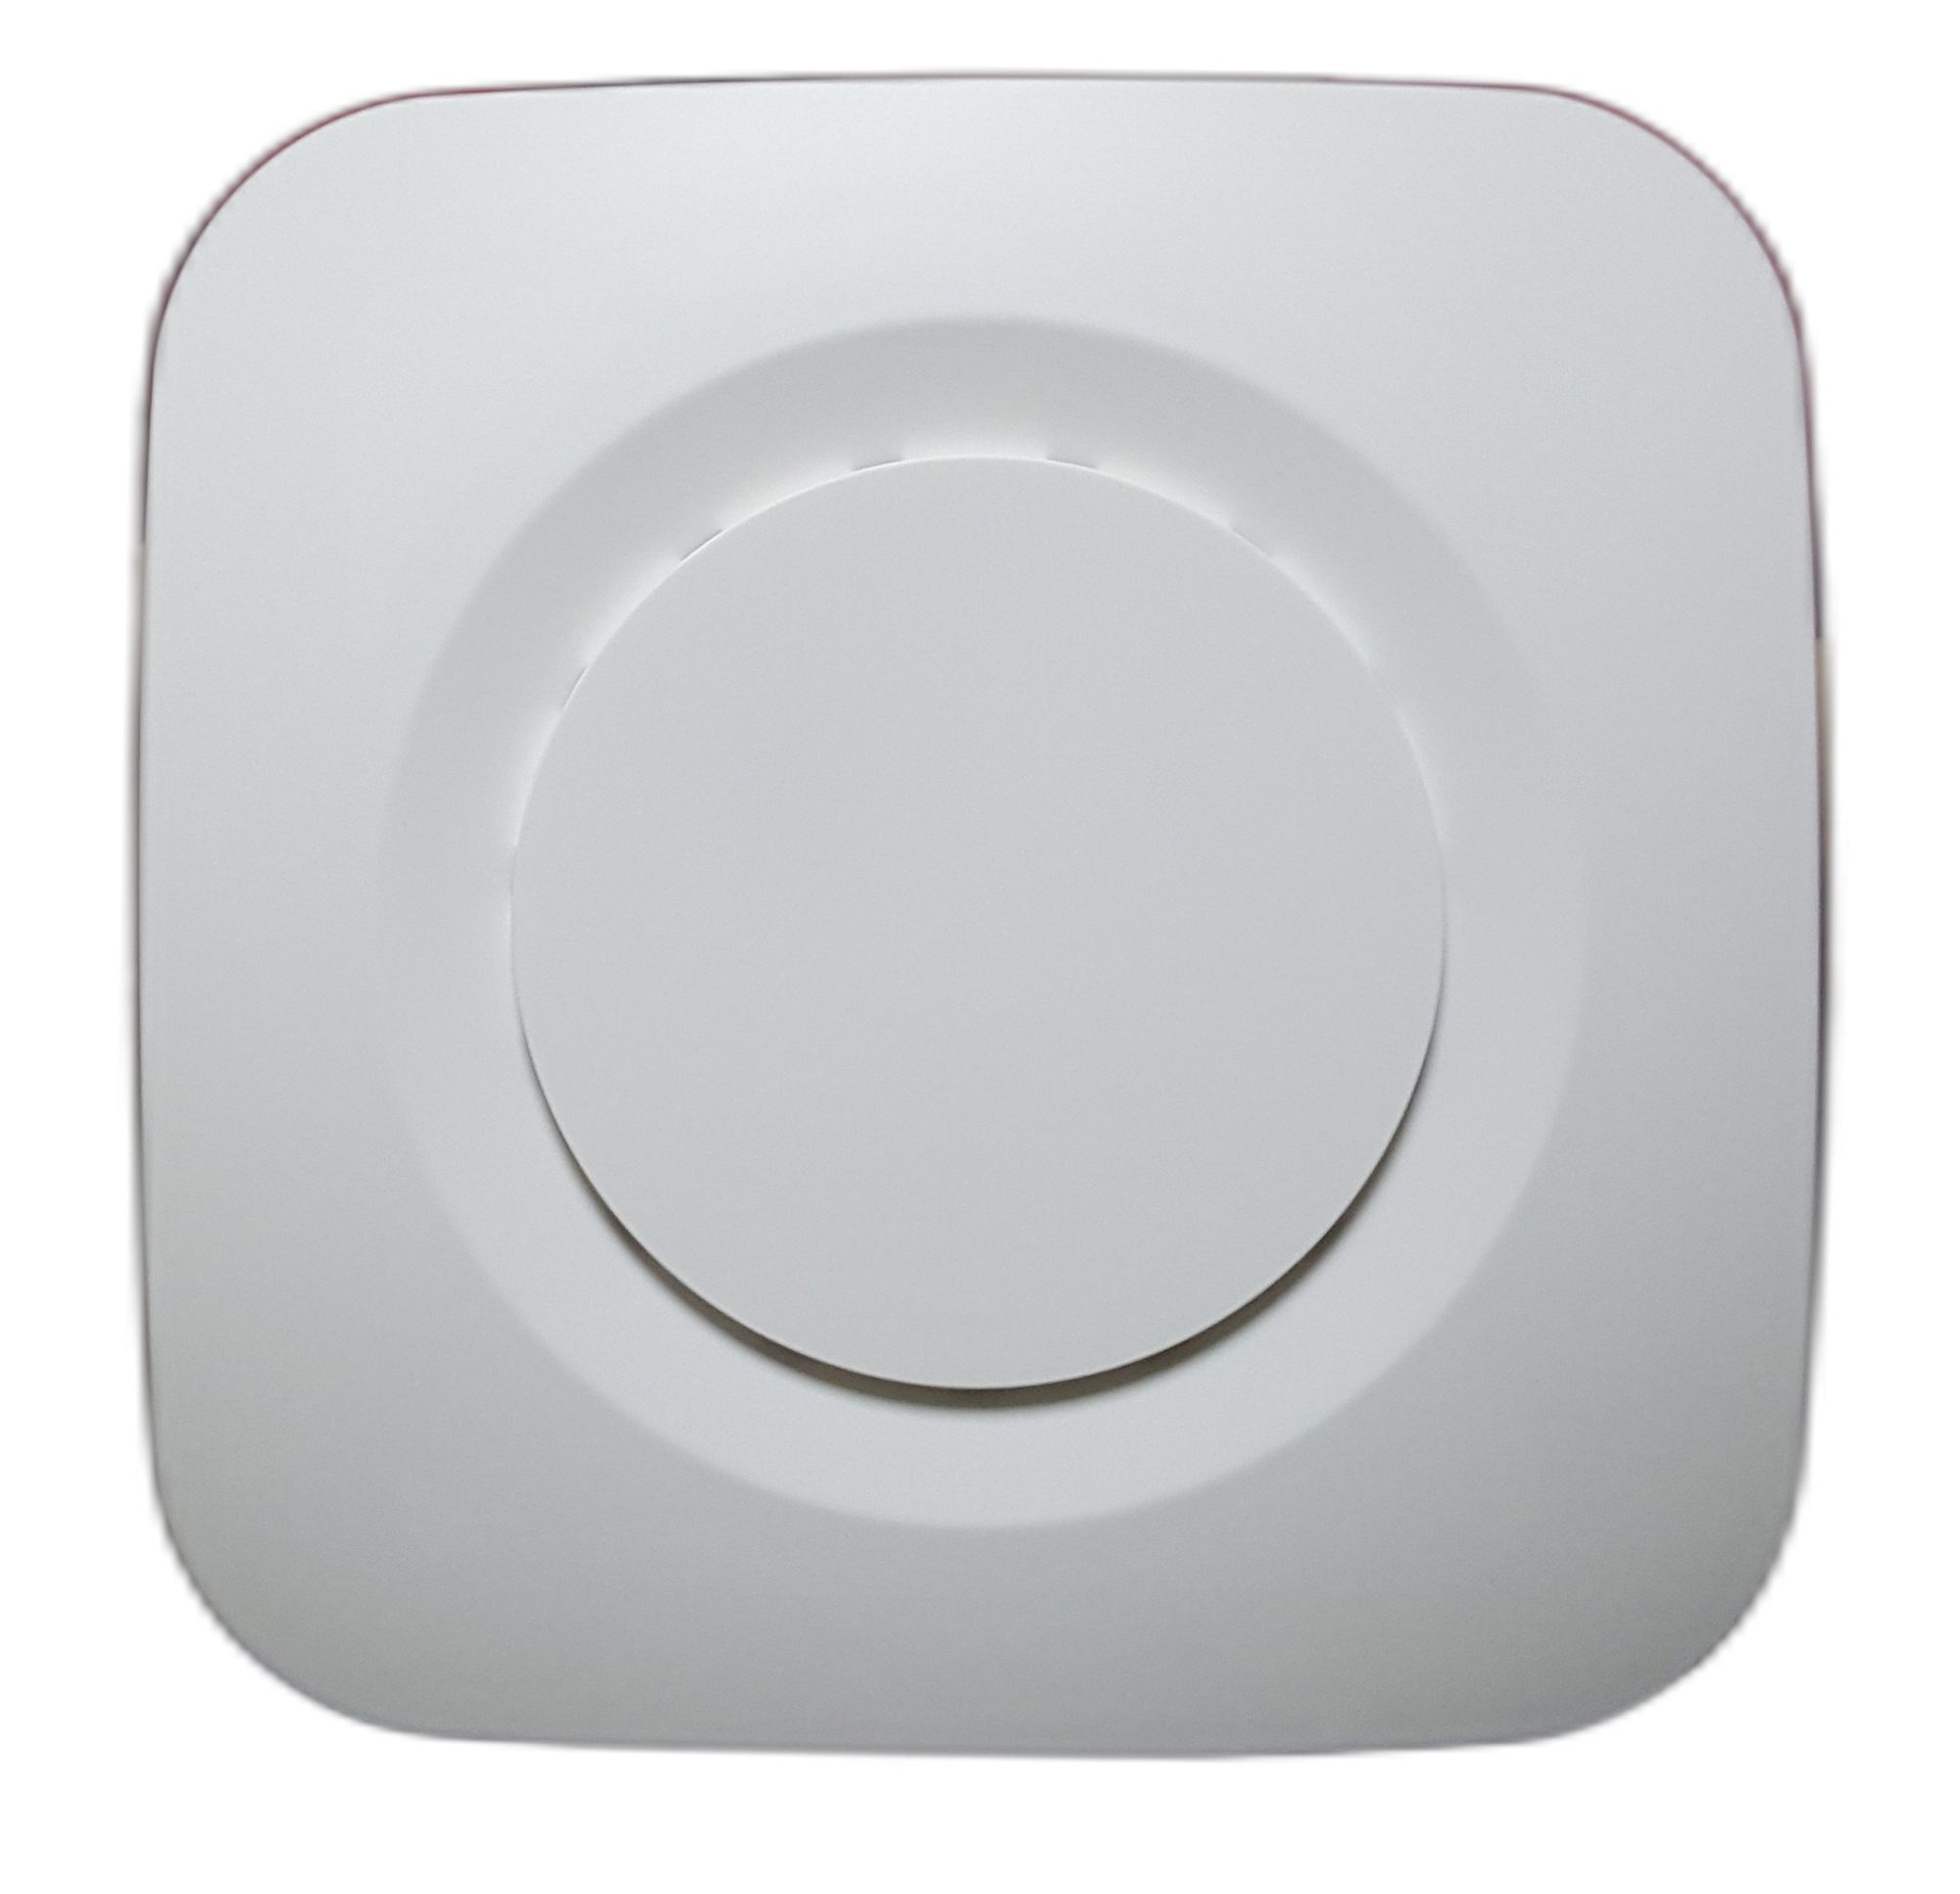 CAP6-1800 Dual Band 1800Mbps Access Point - 1 